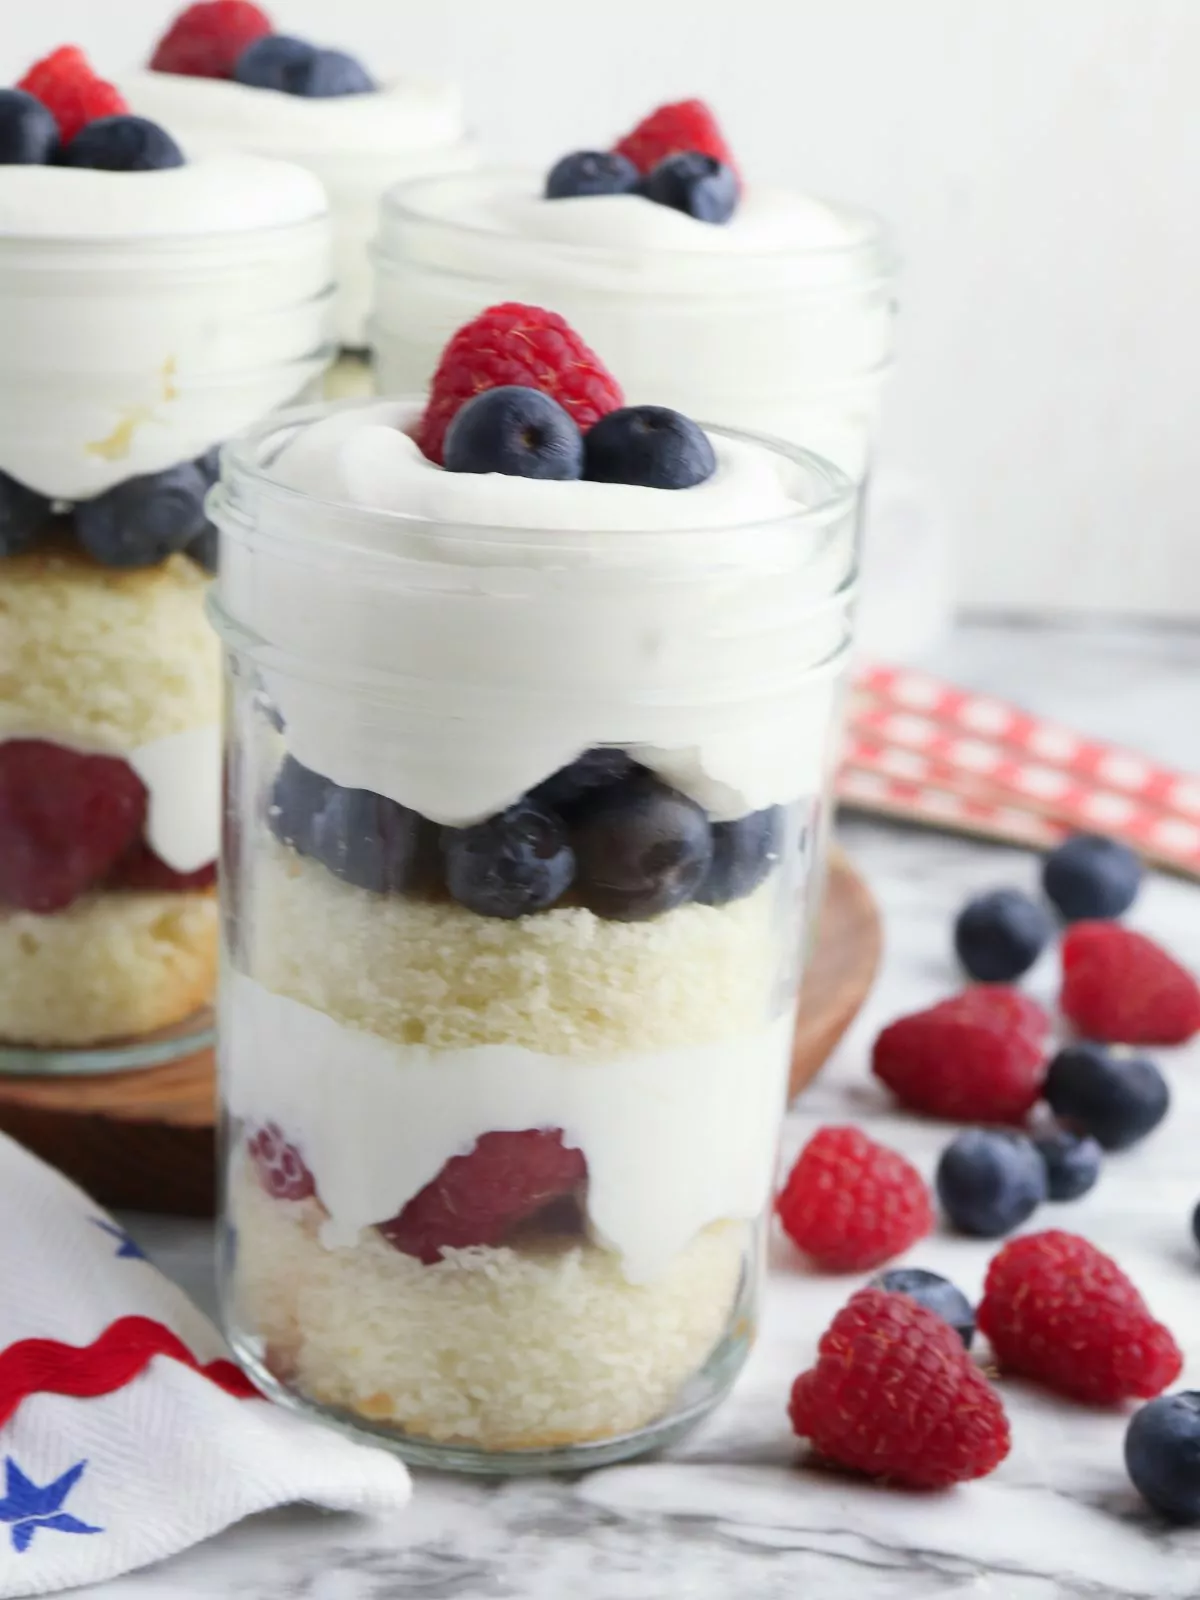 dessert in a jar topped with whipped cream and fresh berries.